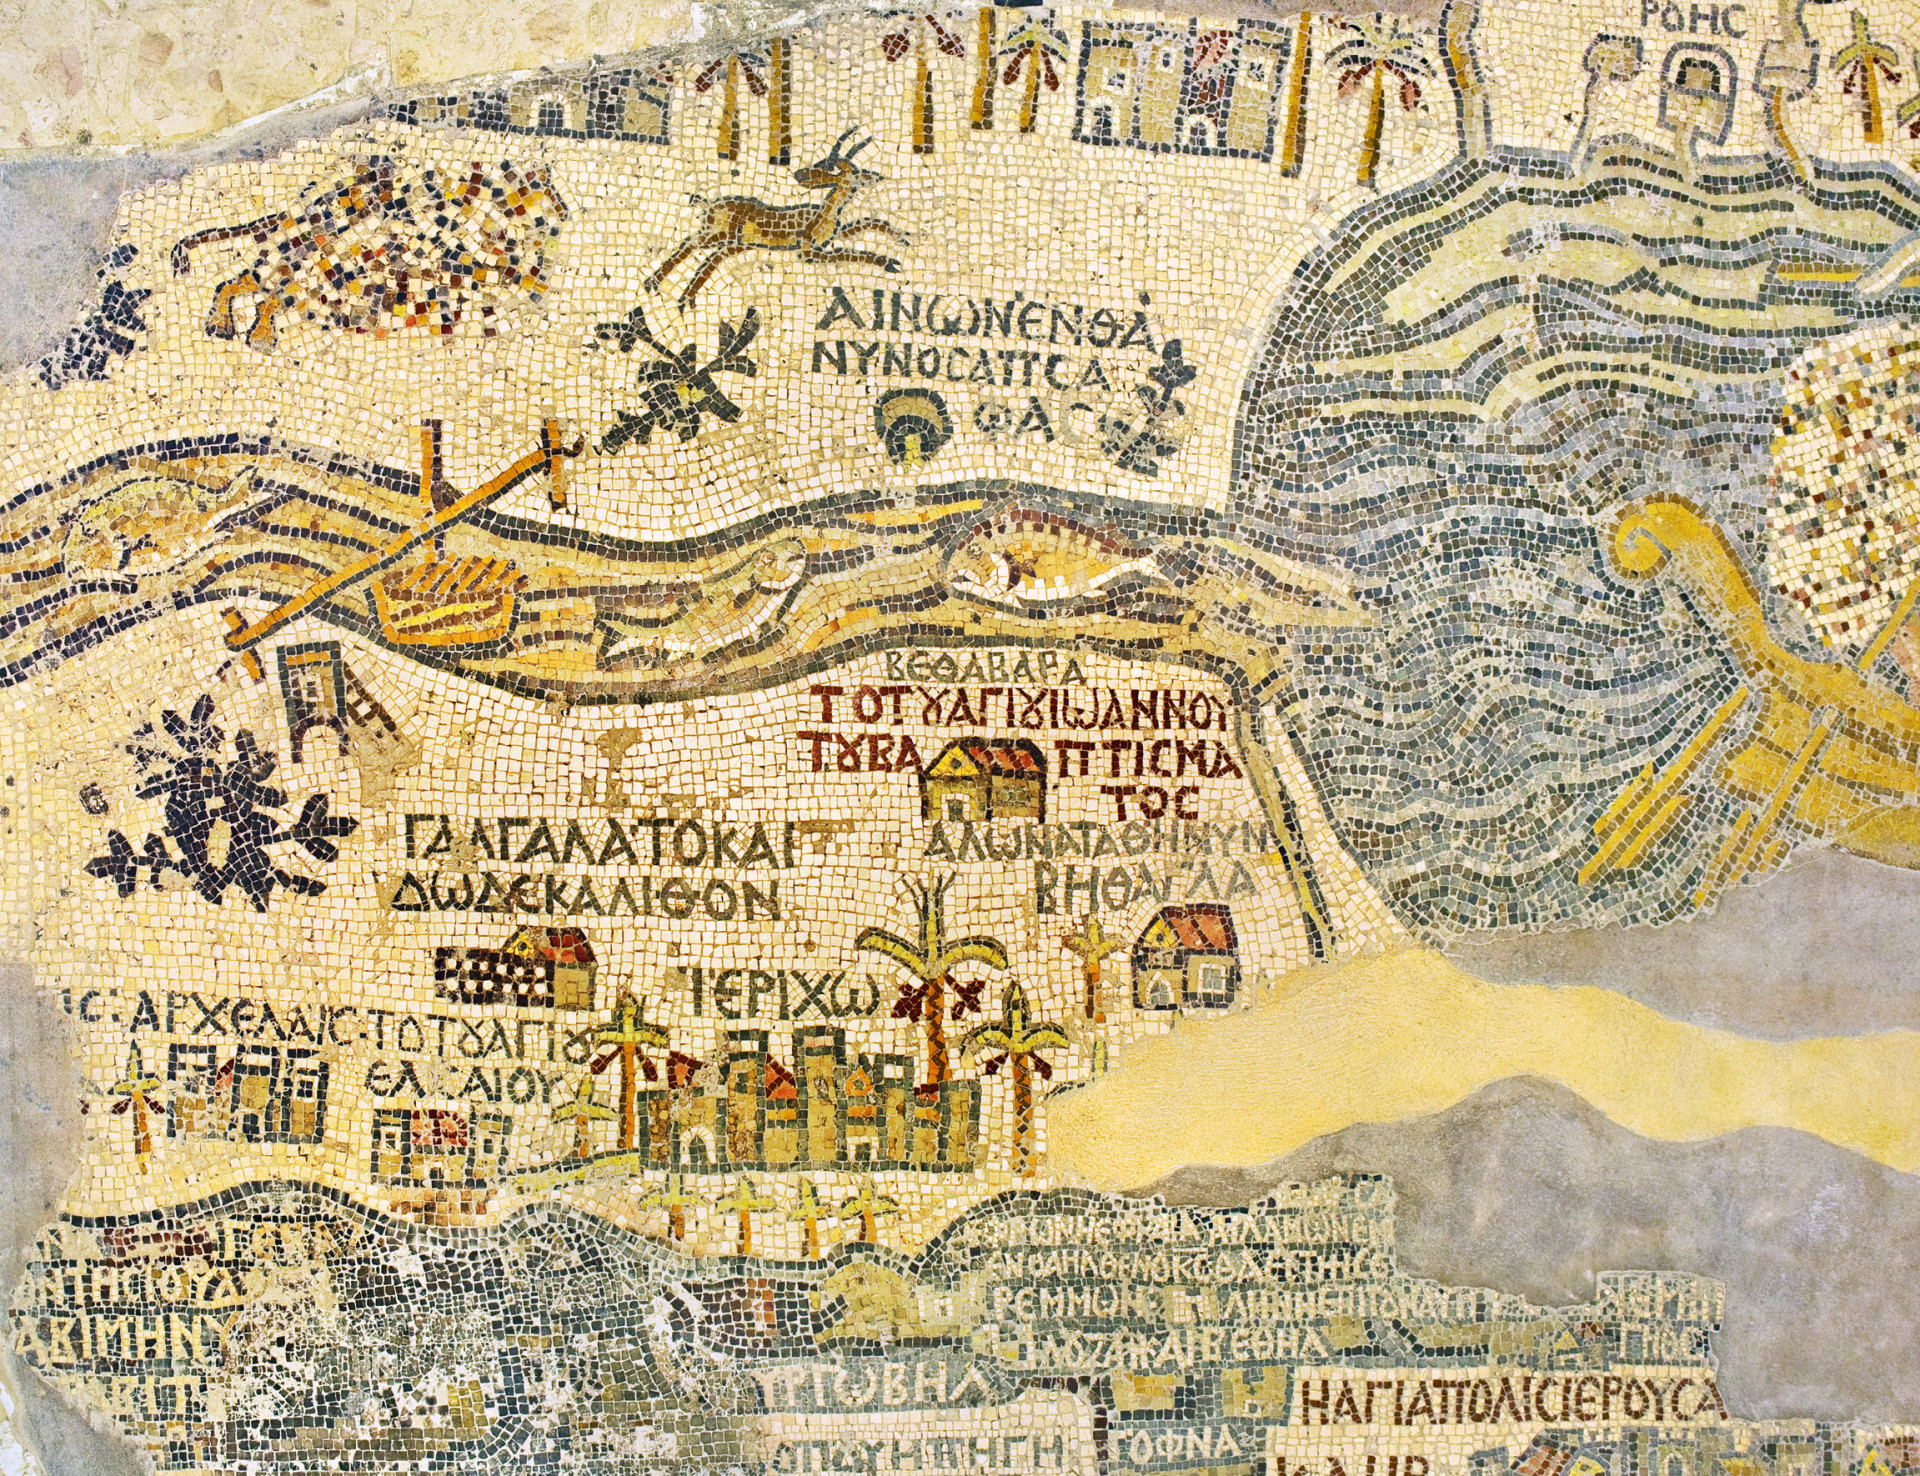 <p>Fish have never thrived in the Dead Sea. And the 6th-century Madaba Map clearly illustrates why. Part of a floor mosaic in the early Byzantine church of Saint George in Madaba, Jordan, the map shows fish swimming down the Jordan River and then turning around once they hit the <a href="https://www.starsinsider.com/health/509975/the-many-health-benefits-of-sea-salt" rel="noopener">saline</a>-saturated lake.</p><p><a href="https://www.msn.com/en-us/community/channel/vid-7xx8mnucu55yw63we9va2gwr7uihbxwc68fxqp25x6tg4ftibpra?cvid=94631541bc0f4f89bfd59158d696ad7e">Follow us and access great exclusive content every day</a></p>